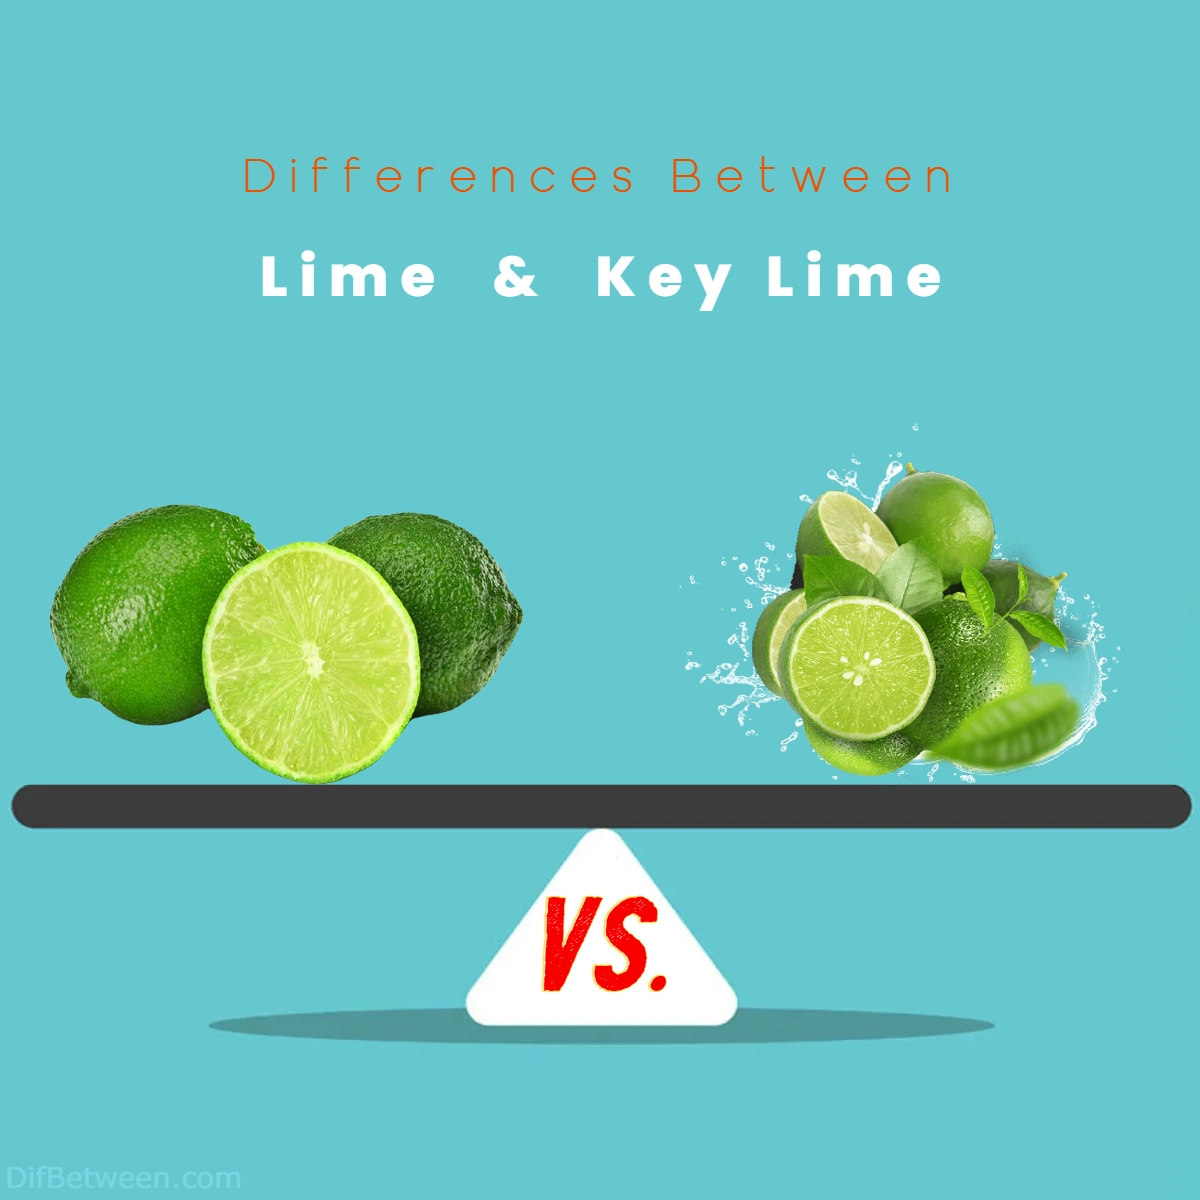 Difference Between Lime and Key Lime